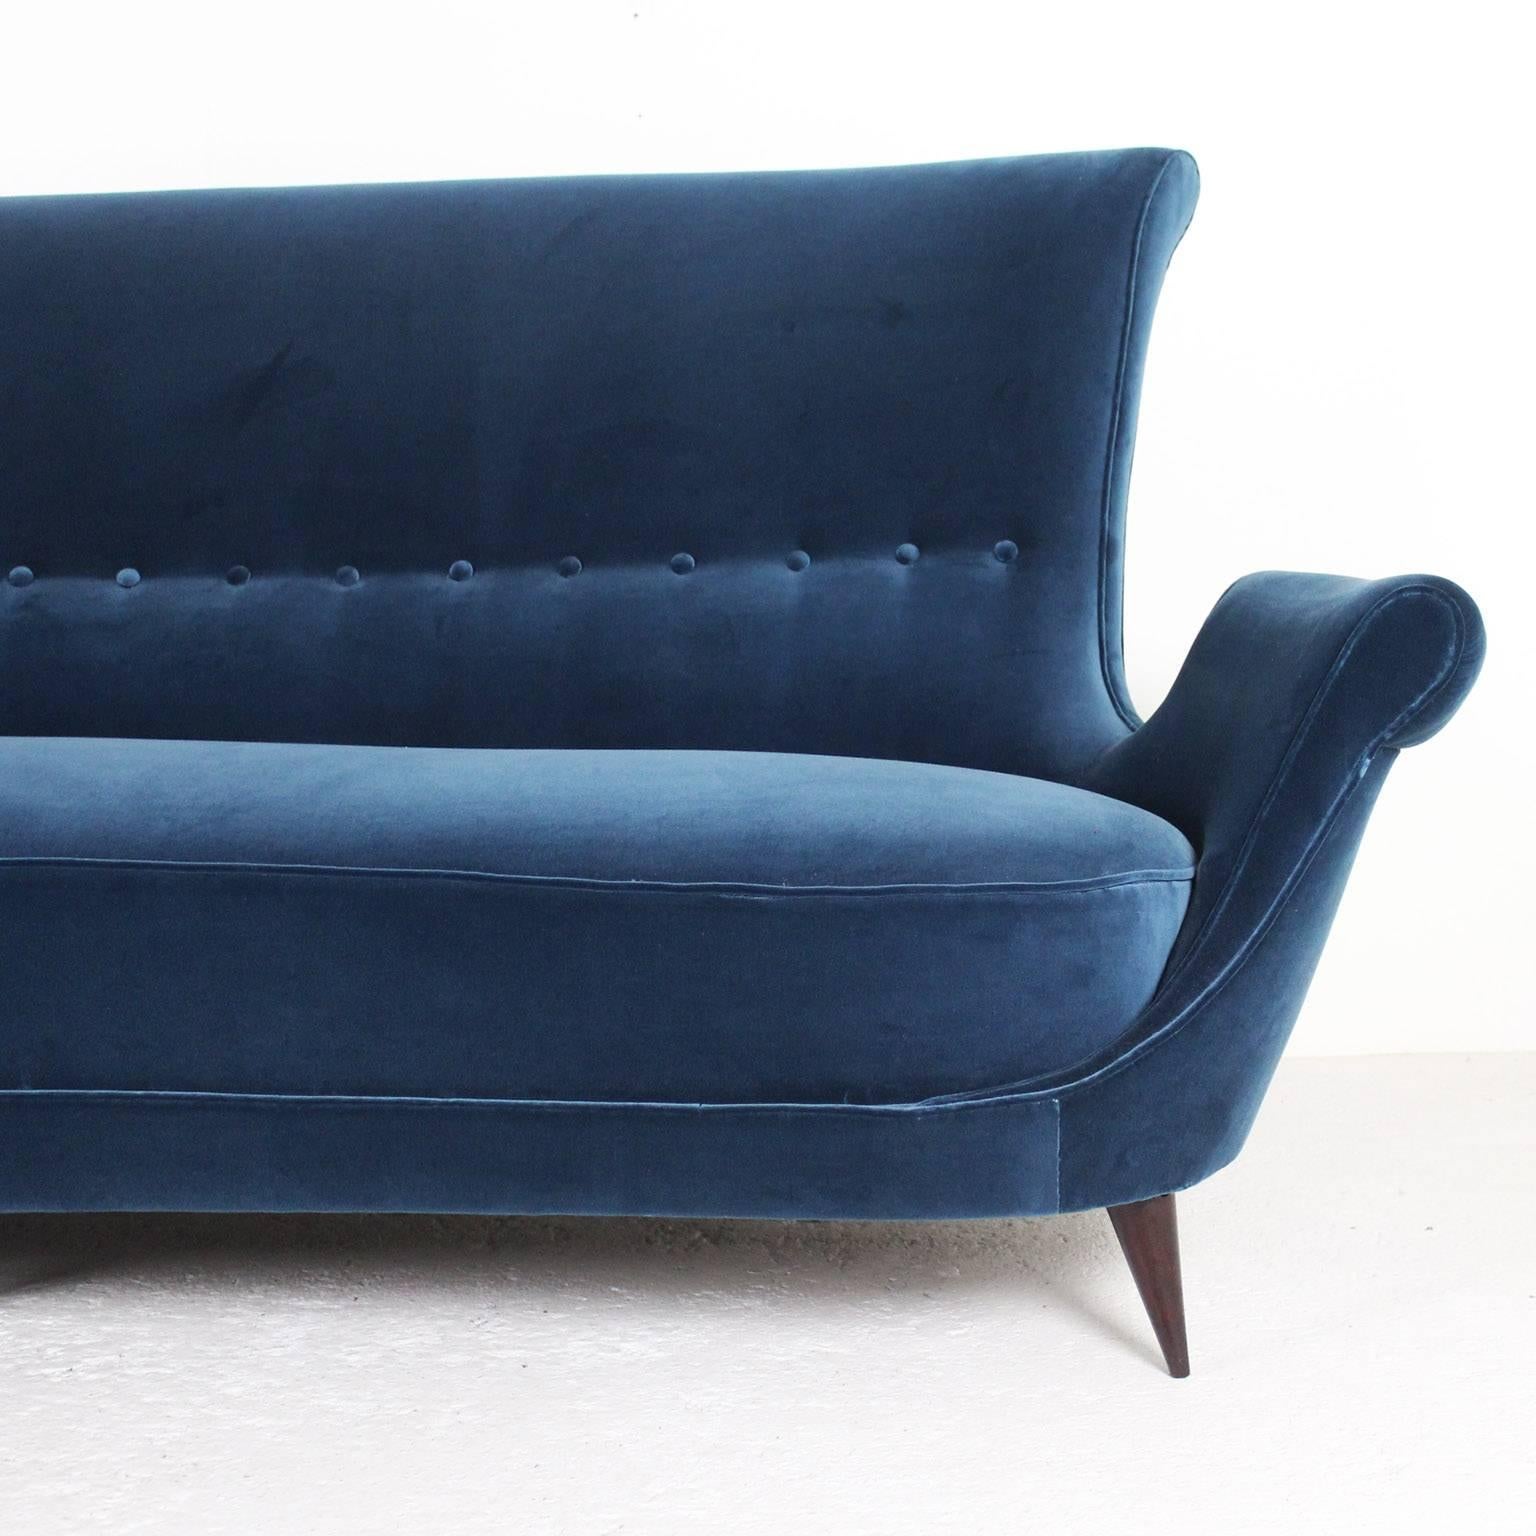 Italian Set of Sofa and Armchairs in Blue Velvet, 1950 For Sale